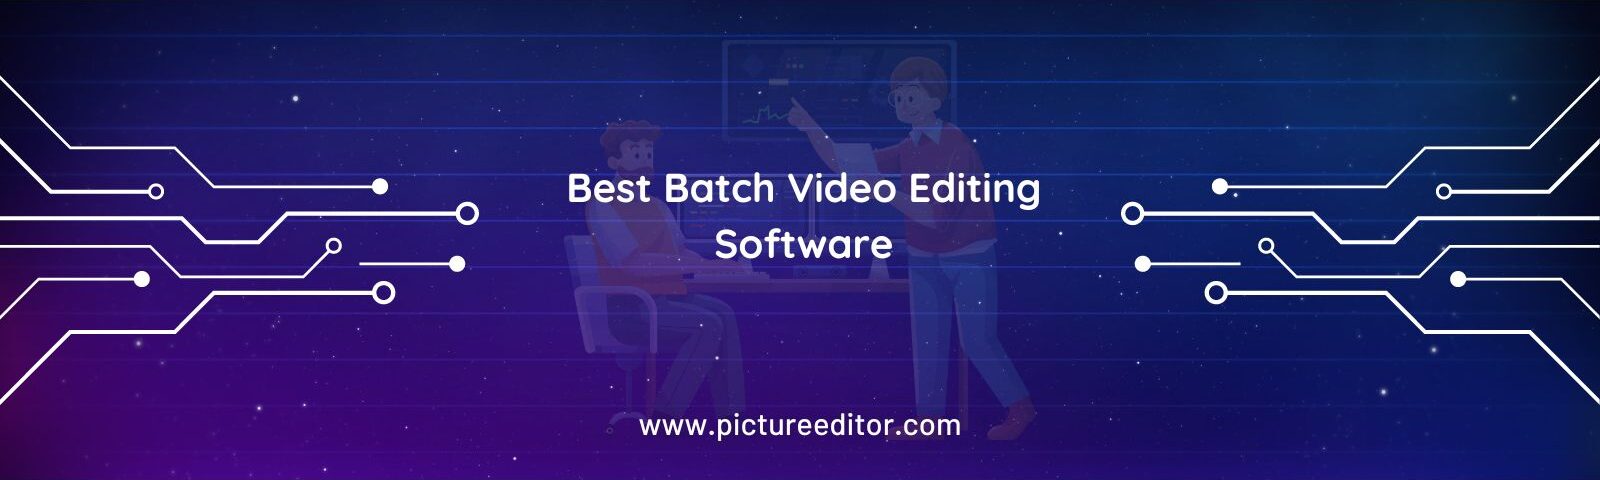 Best Batch Video Editing Software in 2023